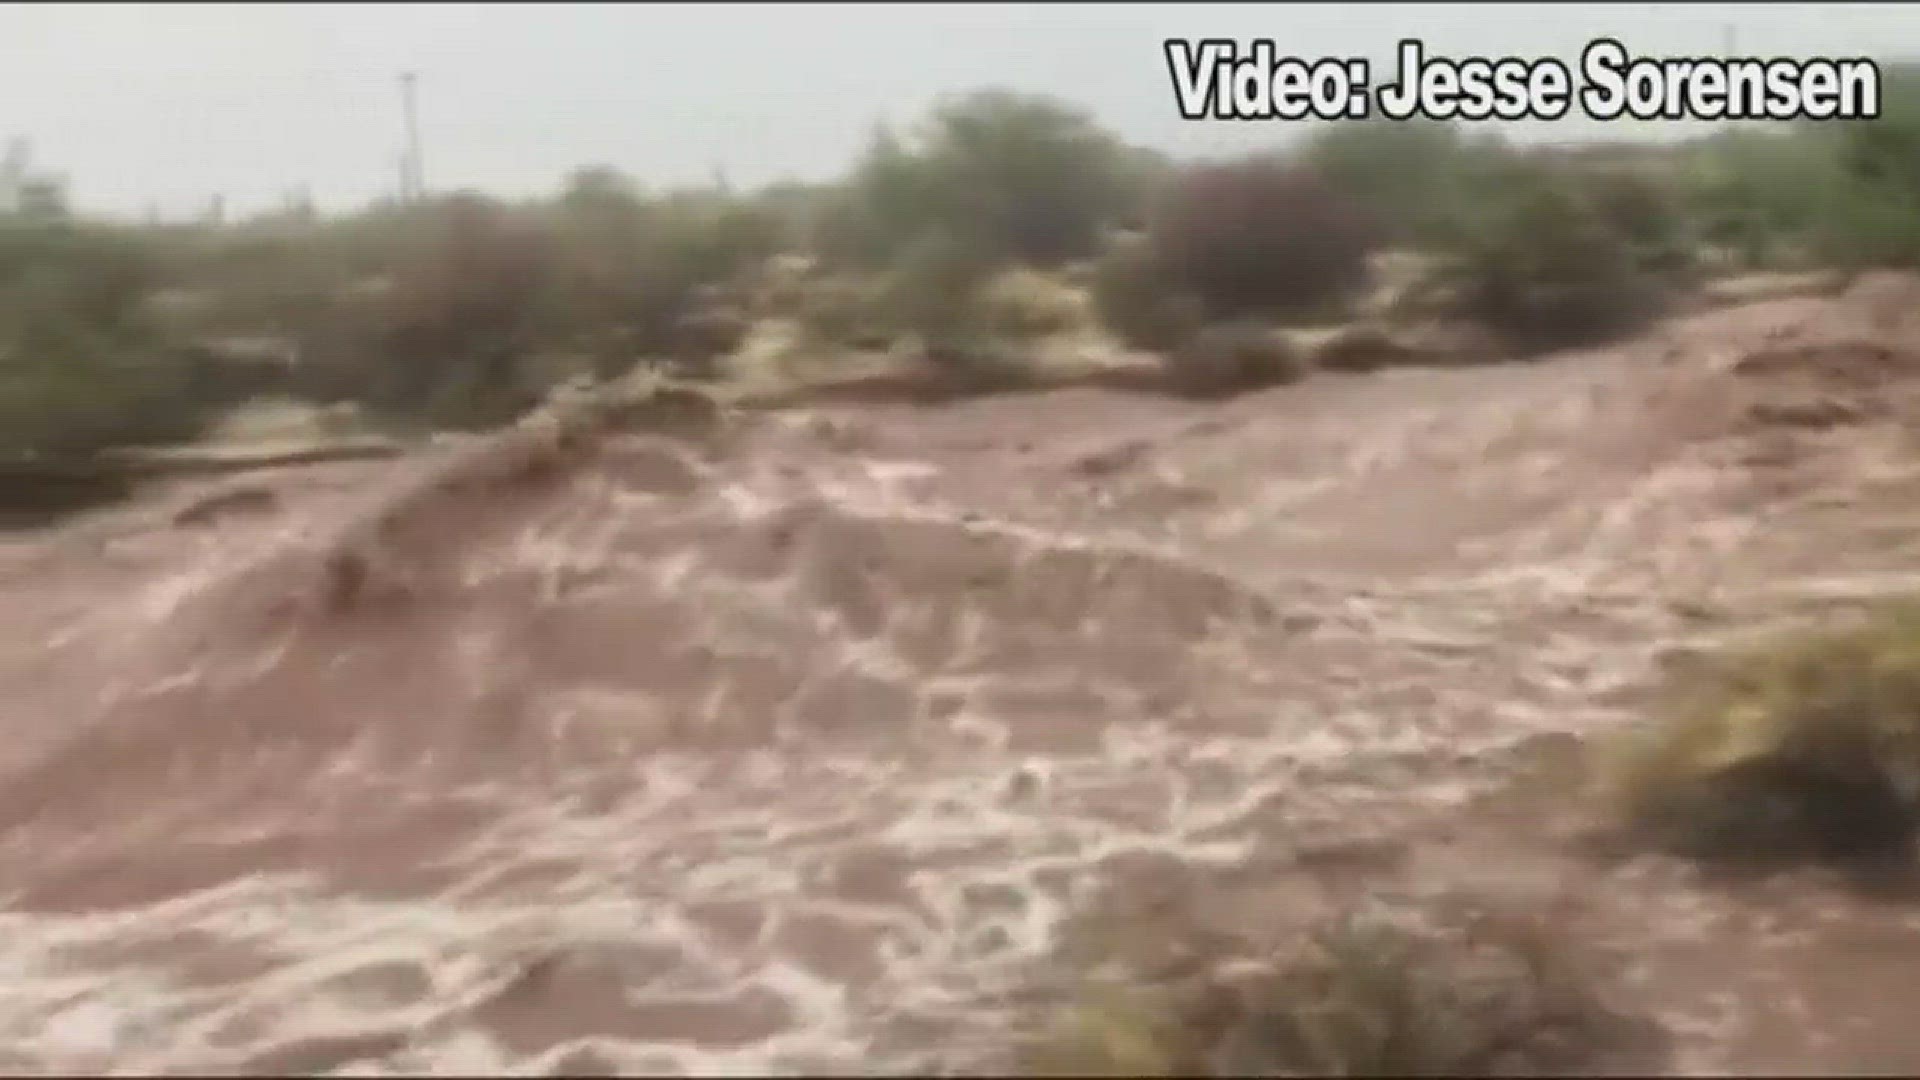 A 12 News viewer captured video of serious flooding in the Apache Junction area Monday morning.